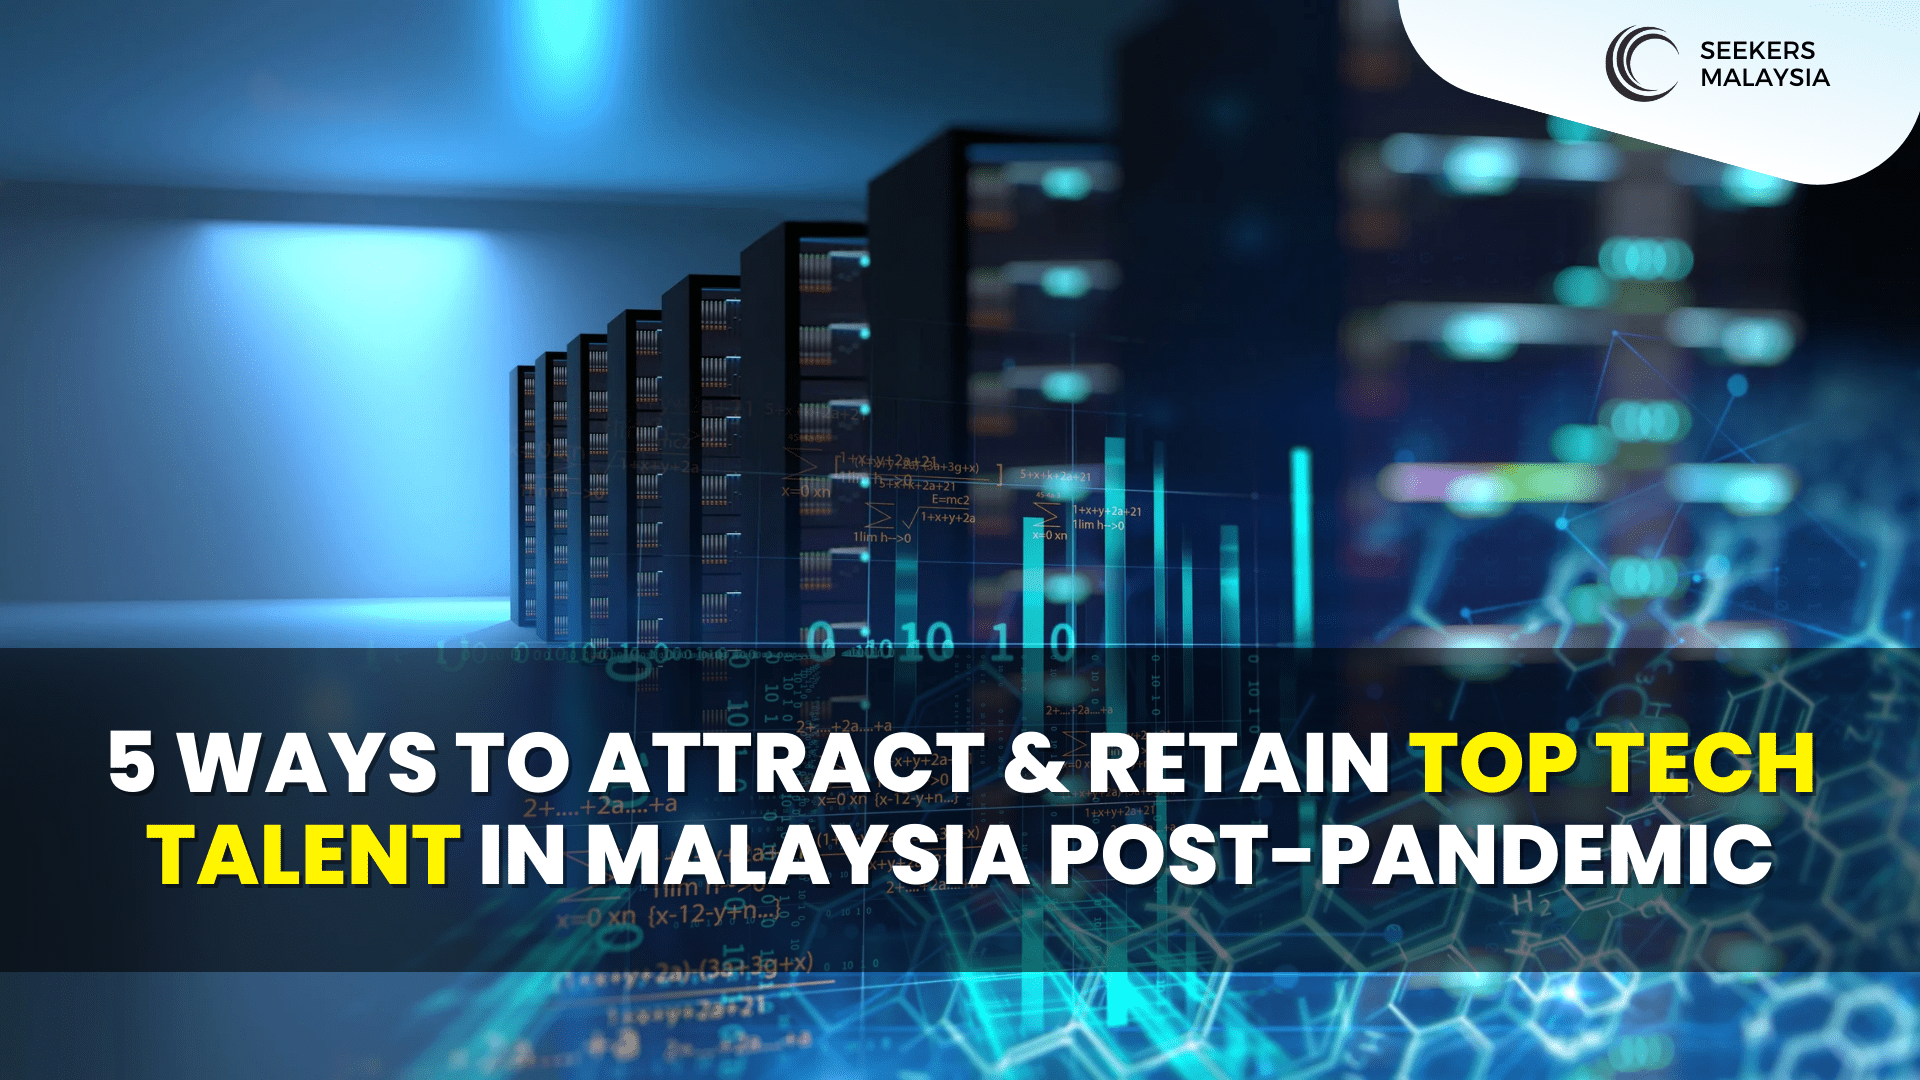 5 Ways to Attract & Retain Top Tech Talent in Malaysia Post-Pandemic